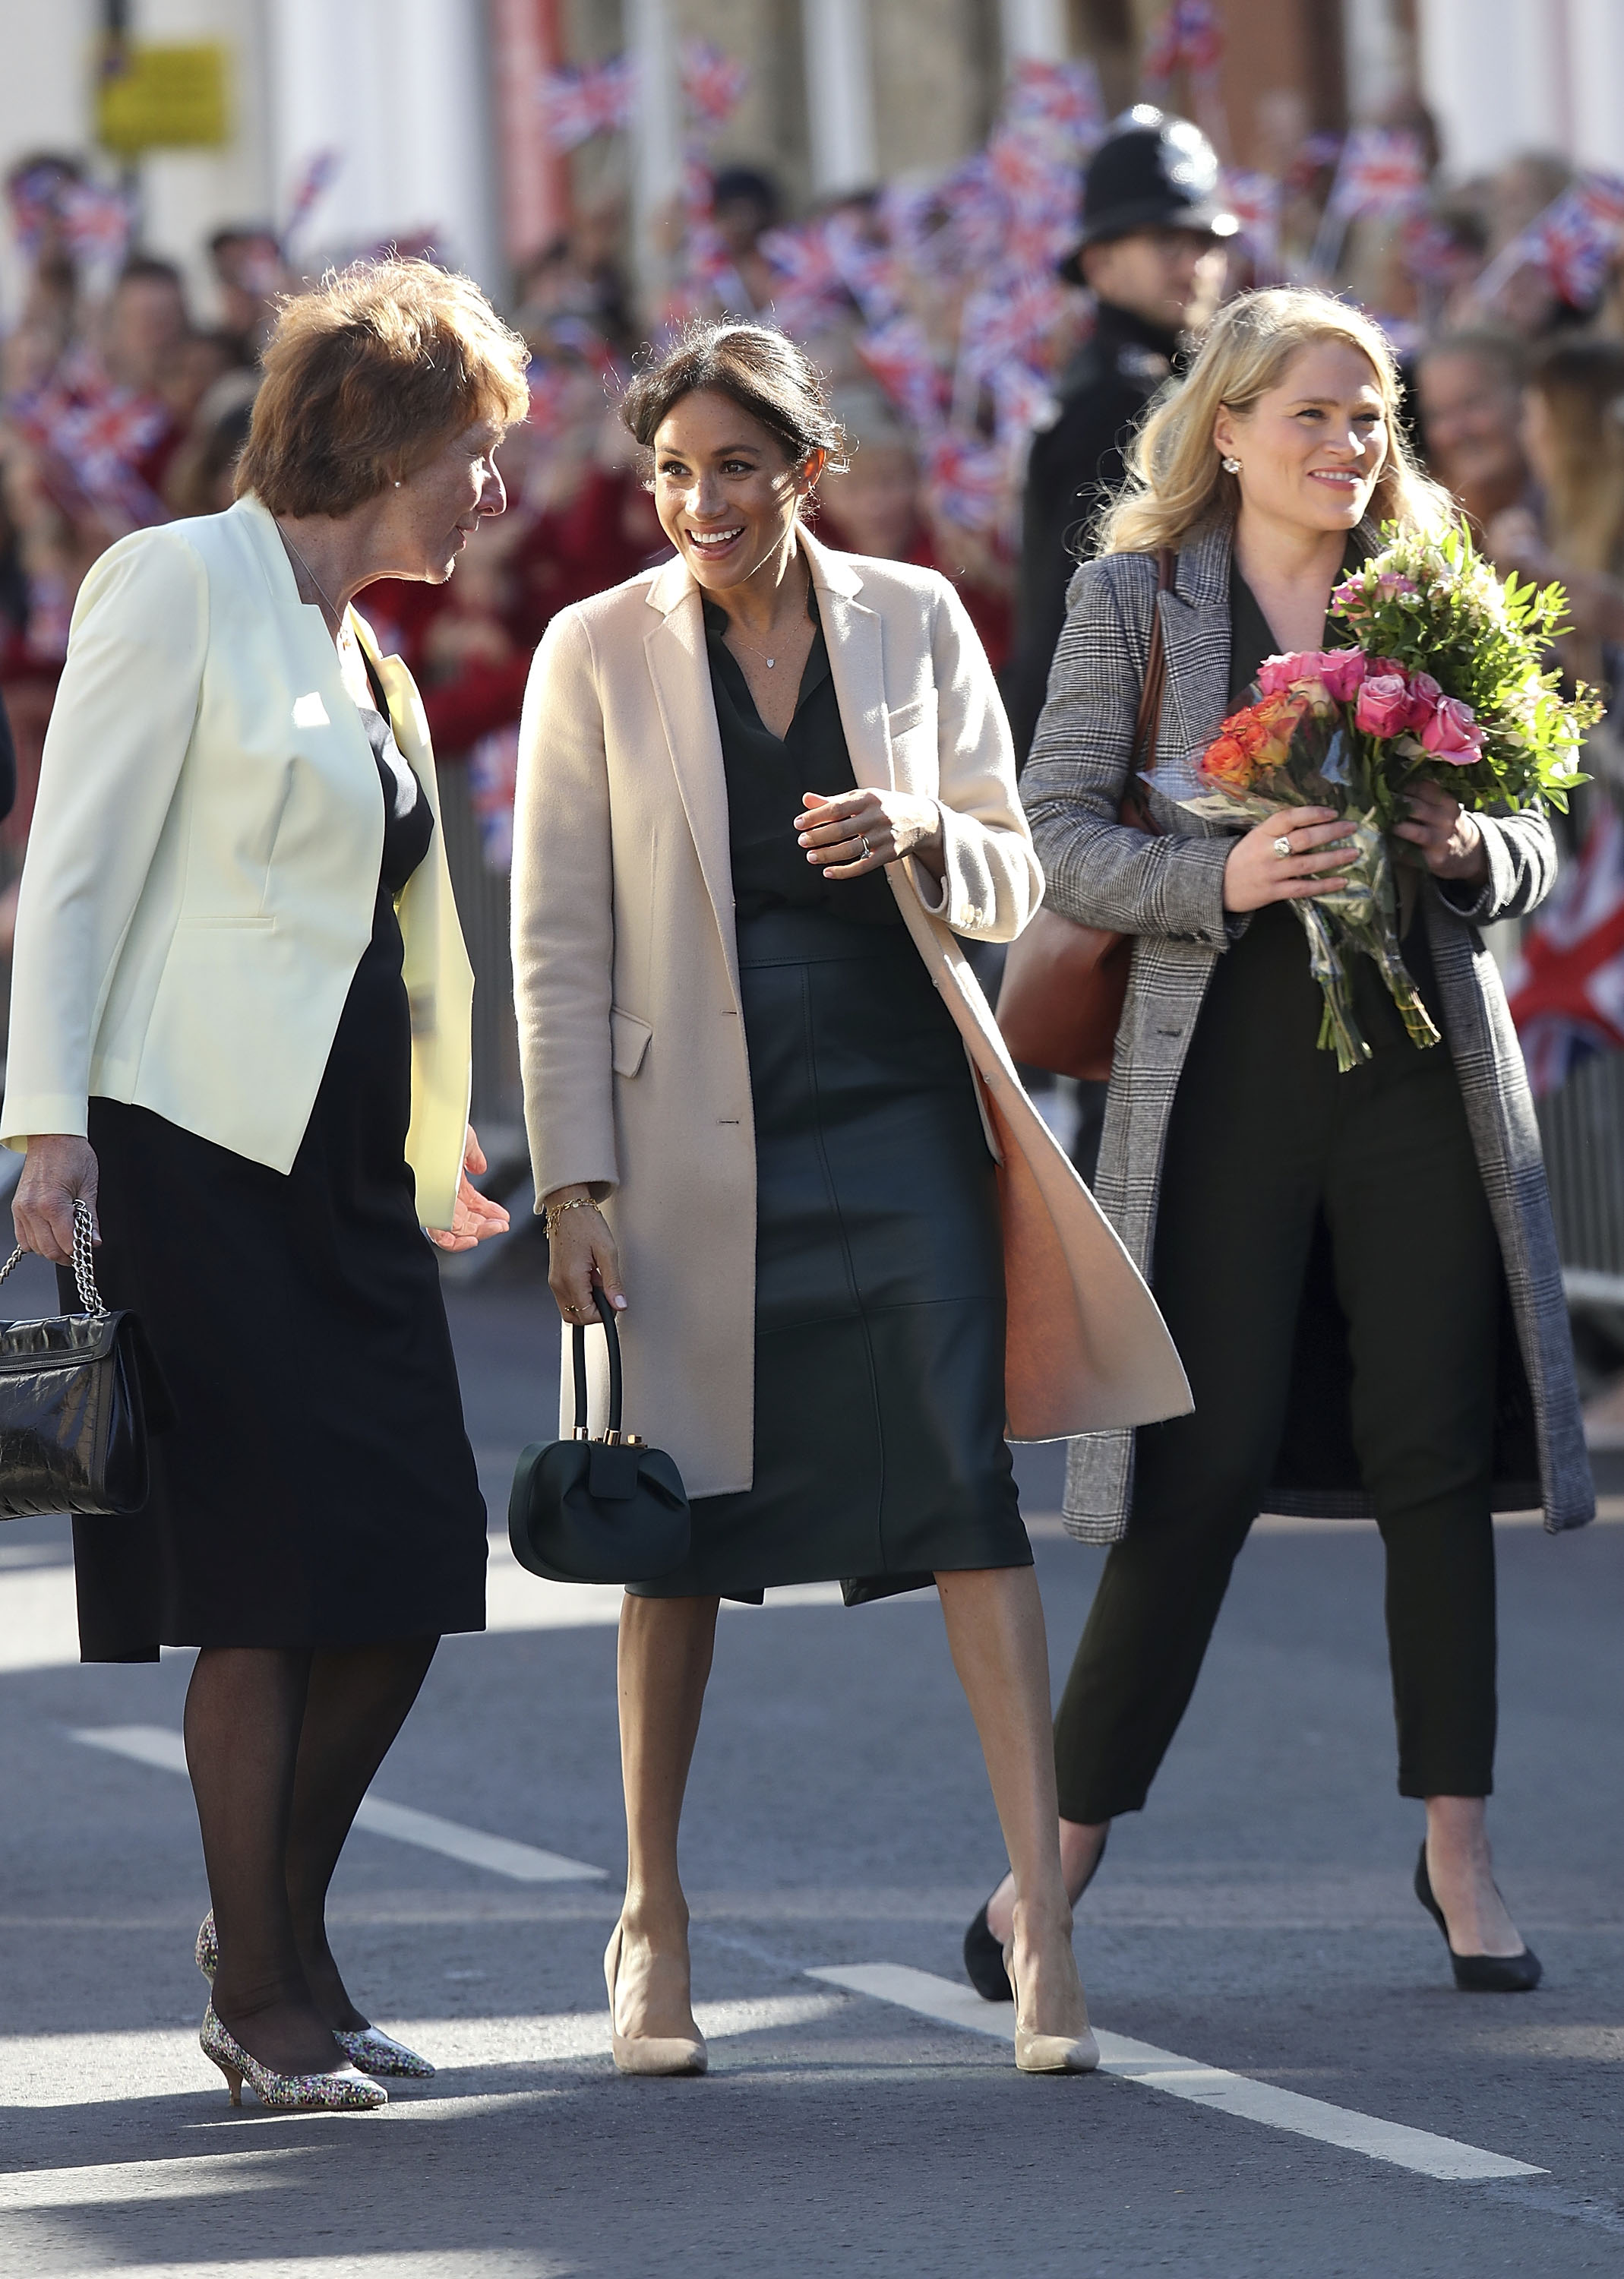 Meghan Markle  an official visit to Sussex with her assistant Amy Pickerill and another woman on October 3, 2018 in Chichester, United Kingdom | Source: Getty Images